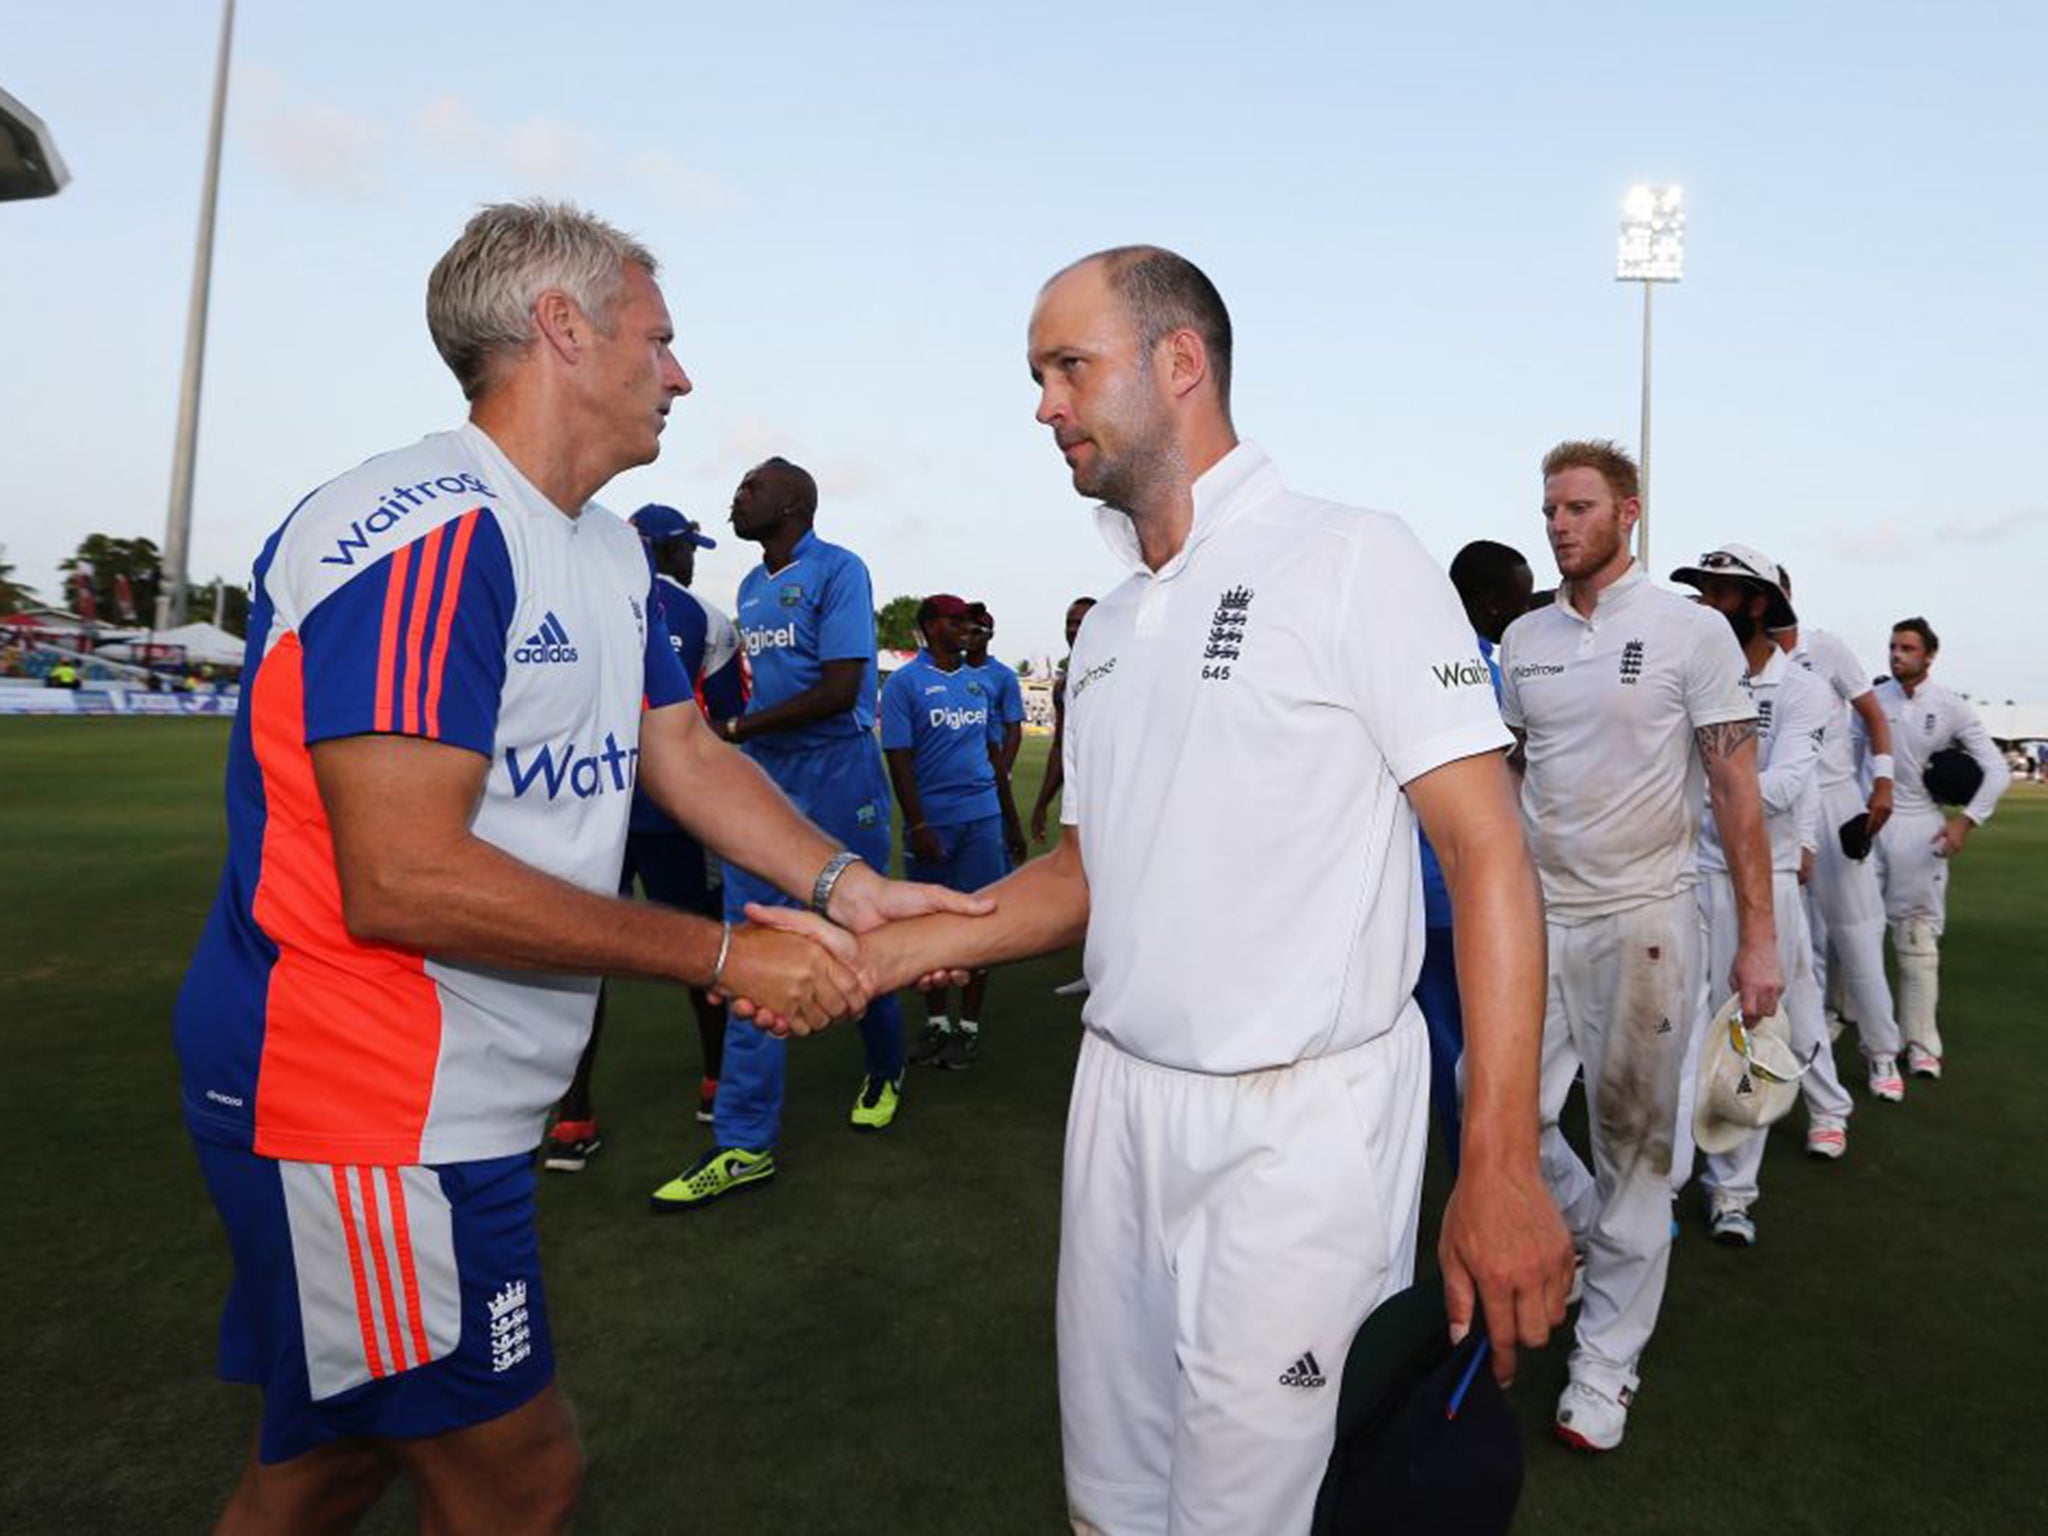 Peter Moores, left, shakes hands with Jonathan Trott after England’s humiliating defeat by West Indies